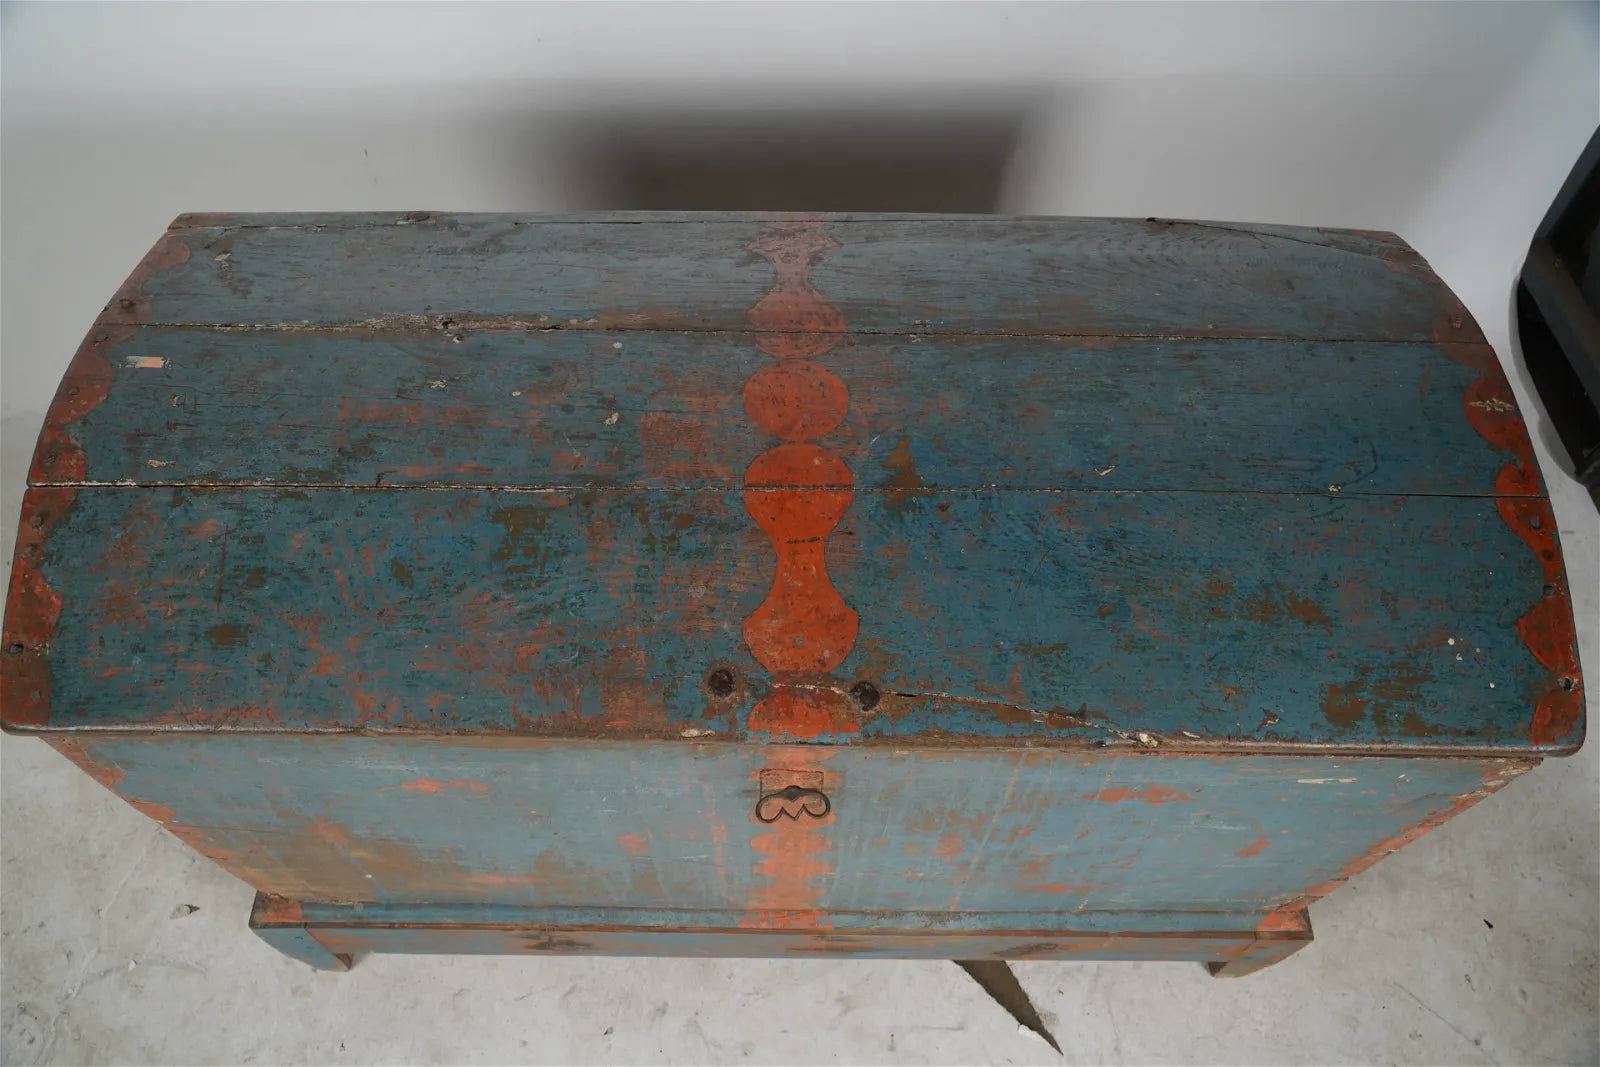 AF4-202: Antique Early 18th C American Colonial Pine Blanket Chest with Original Blue Painted Finish